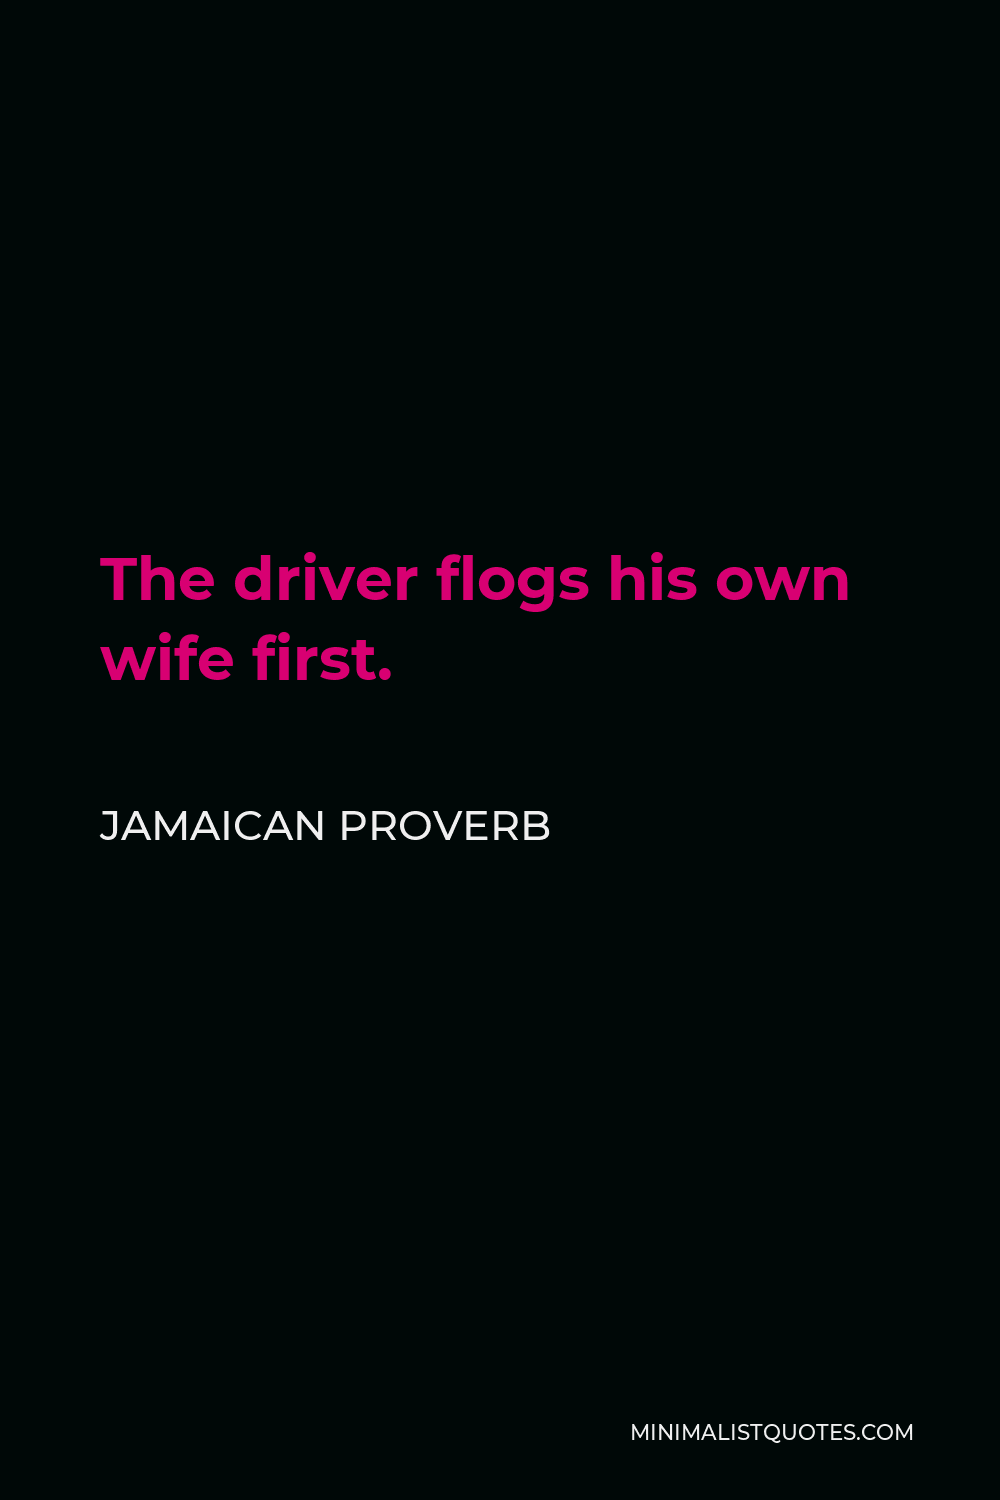 Jamaican Proverb Quote - The driver flogs his own wife first.